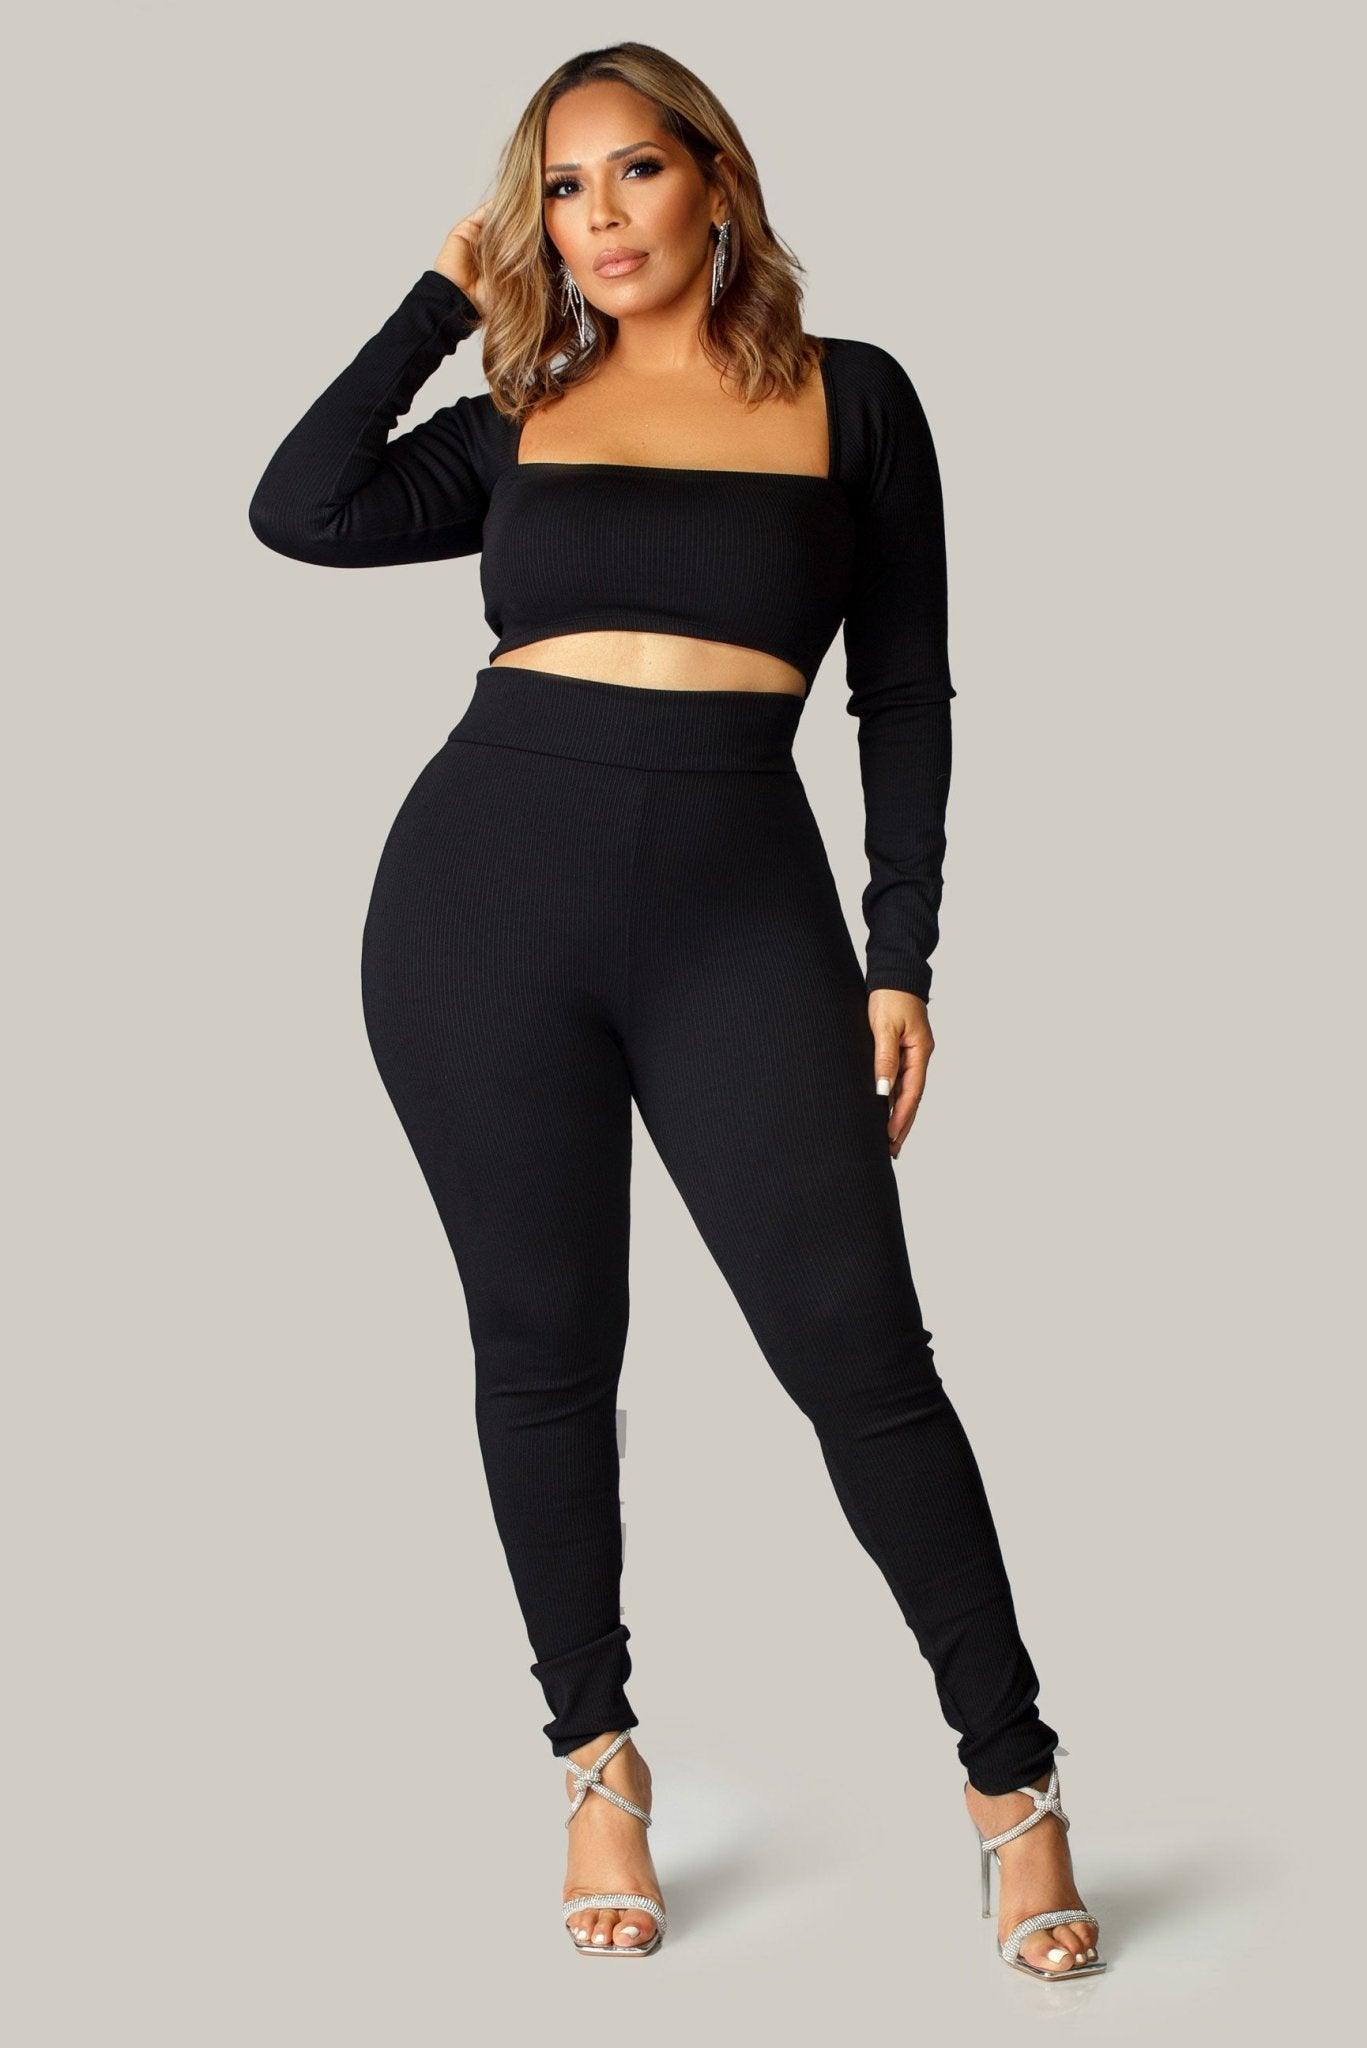 Luxia Solid Crop Top and Leggings Set - MY SEXY STYLES